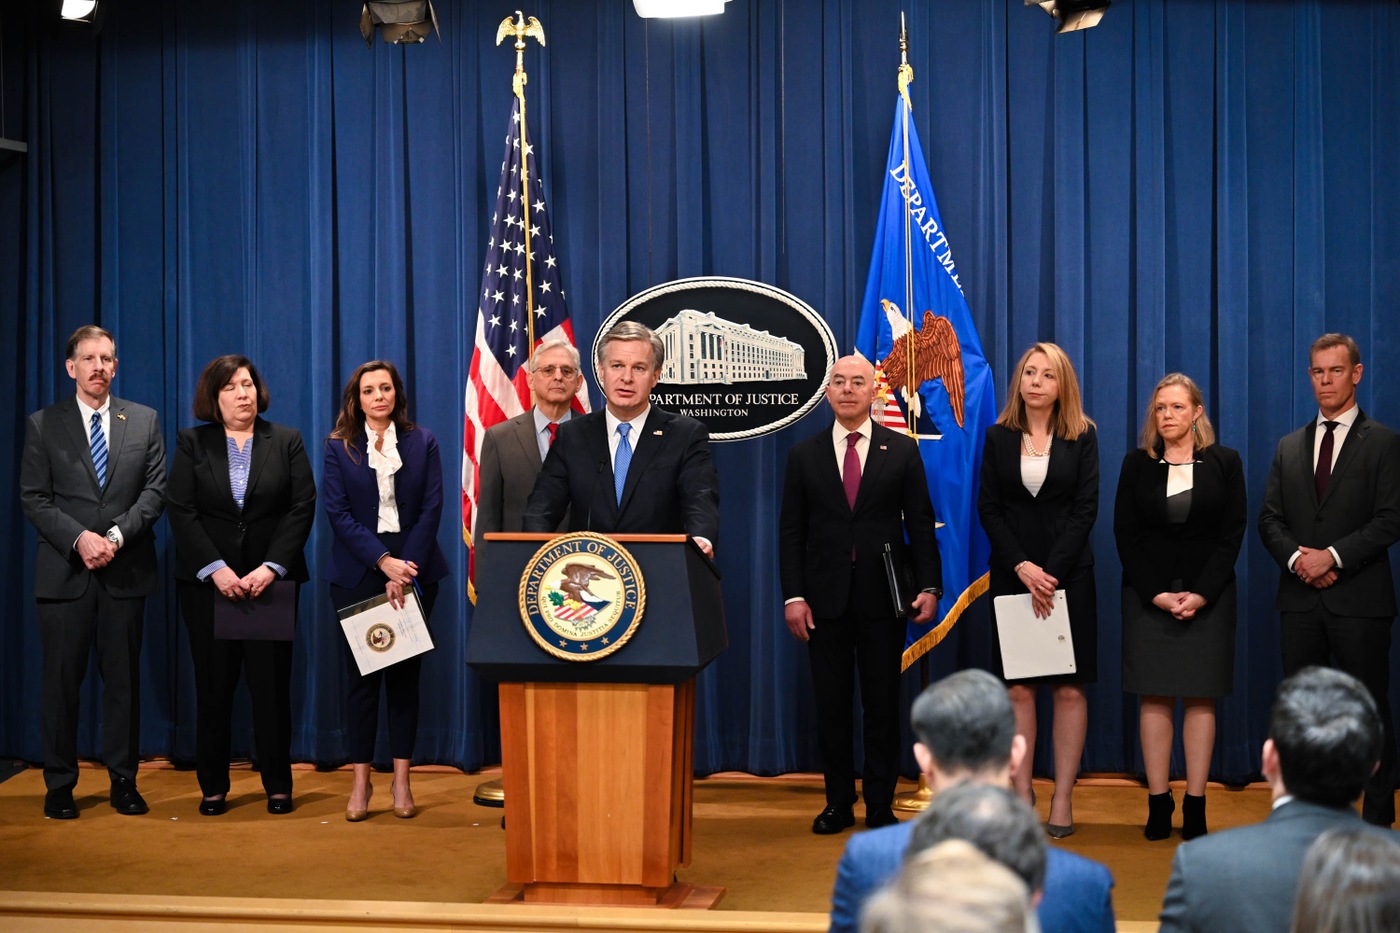 FBI Director Christopher Wray (at podium) speaks at a December 6, 2023, press conference alongside other federal officials including Attorney General Merrick B. Garland (at Wray's immediate left) and Secretary of Homeland Security Alejandro Mayorkas. The press conference was held in Washington, D.C.